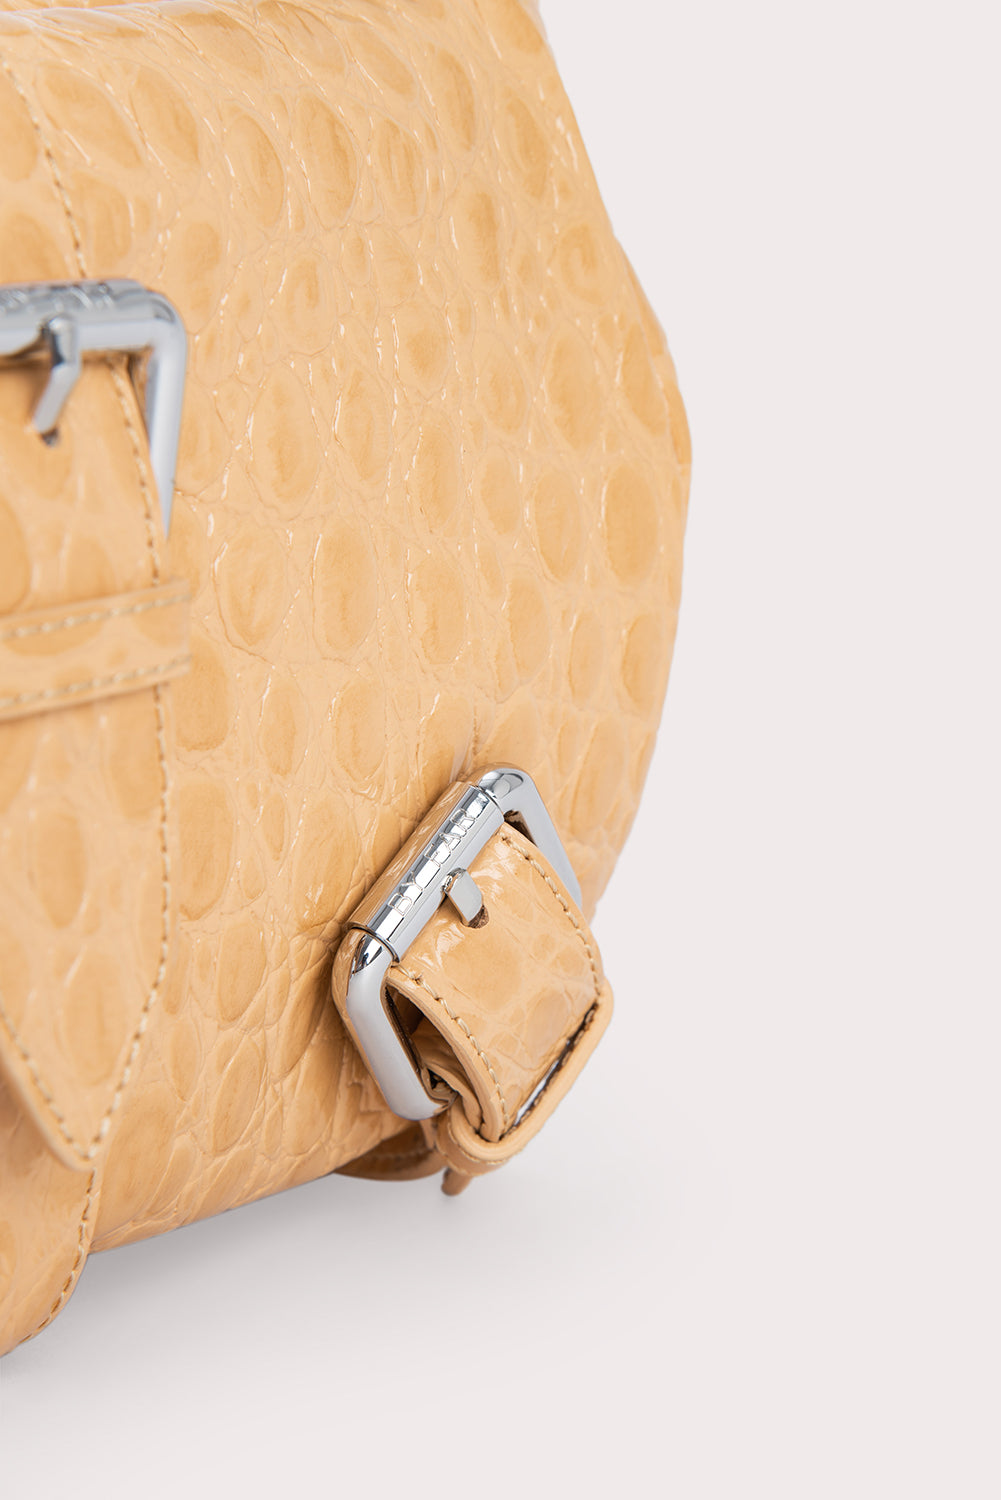 Murphy Biscuit Circular Croco Embossed Leather